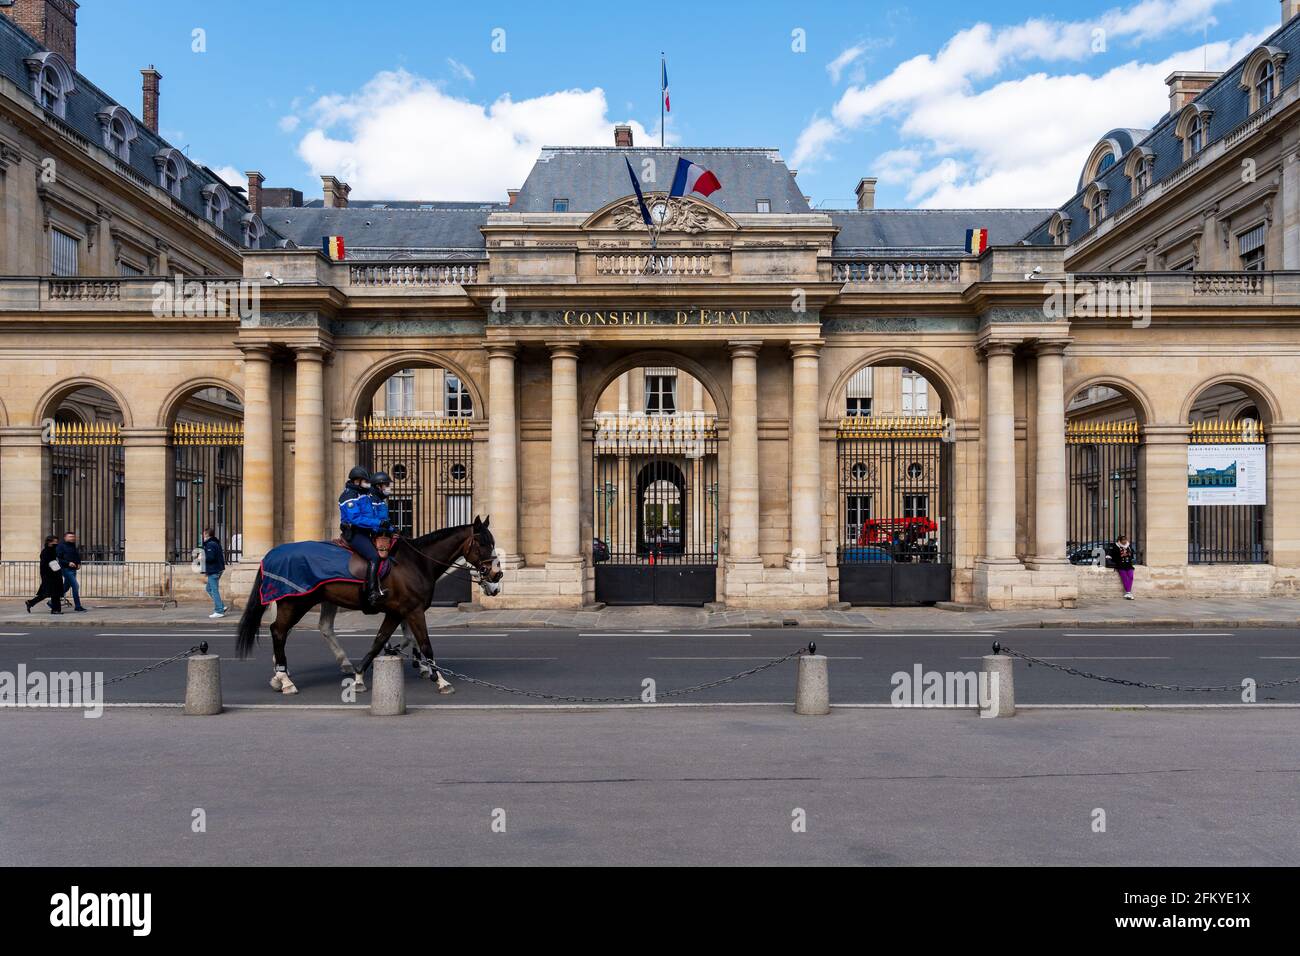 Mounted Police patrol in front of the French Council of State - Paris, France Stock Photo